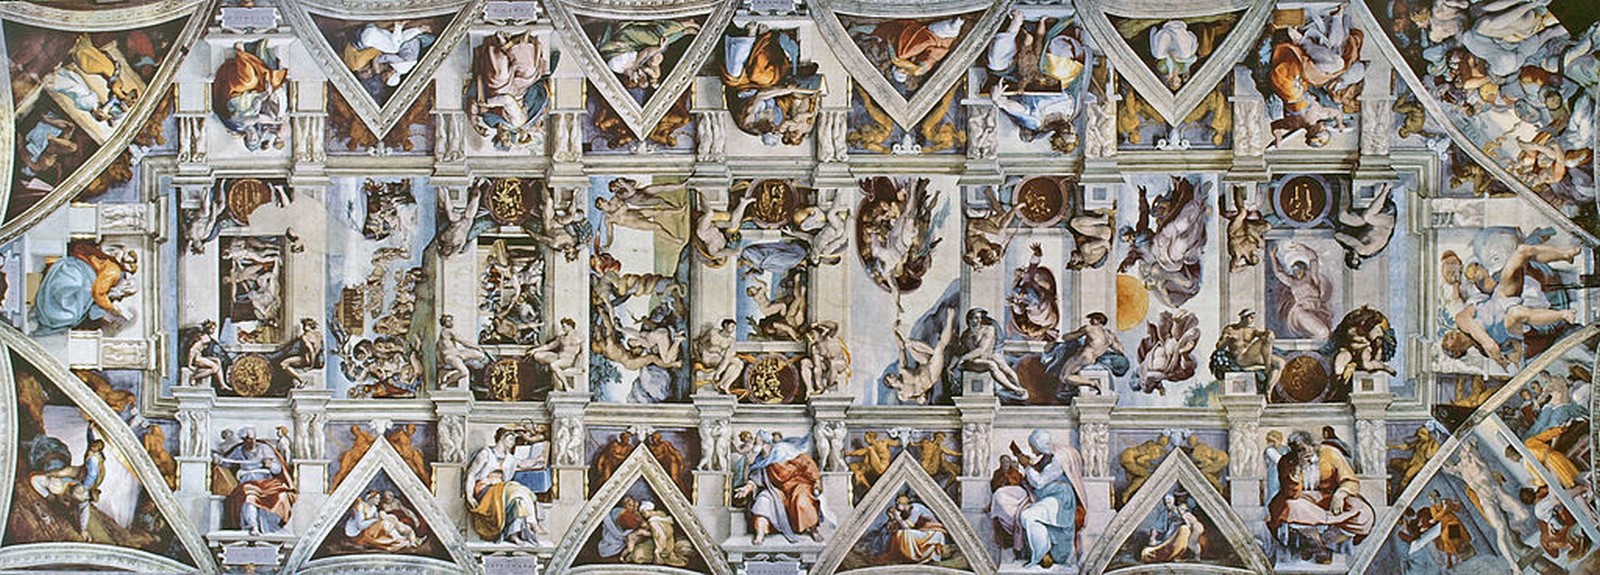 Art and Architecture: A crossover in Renaissance Painting - Sheet5